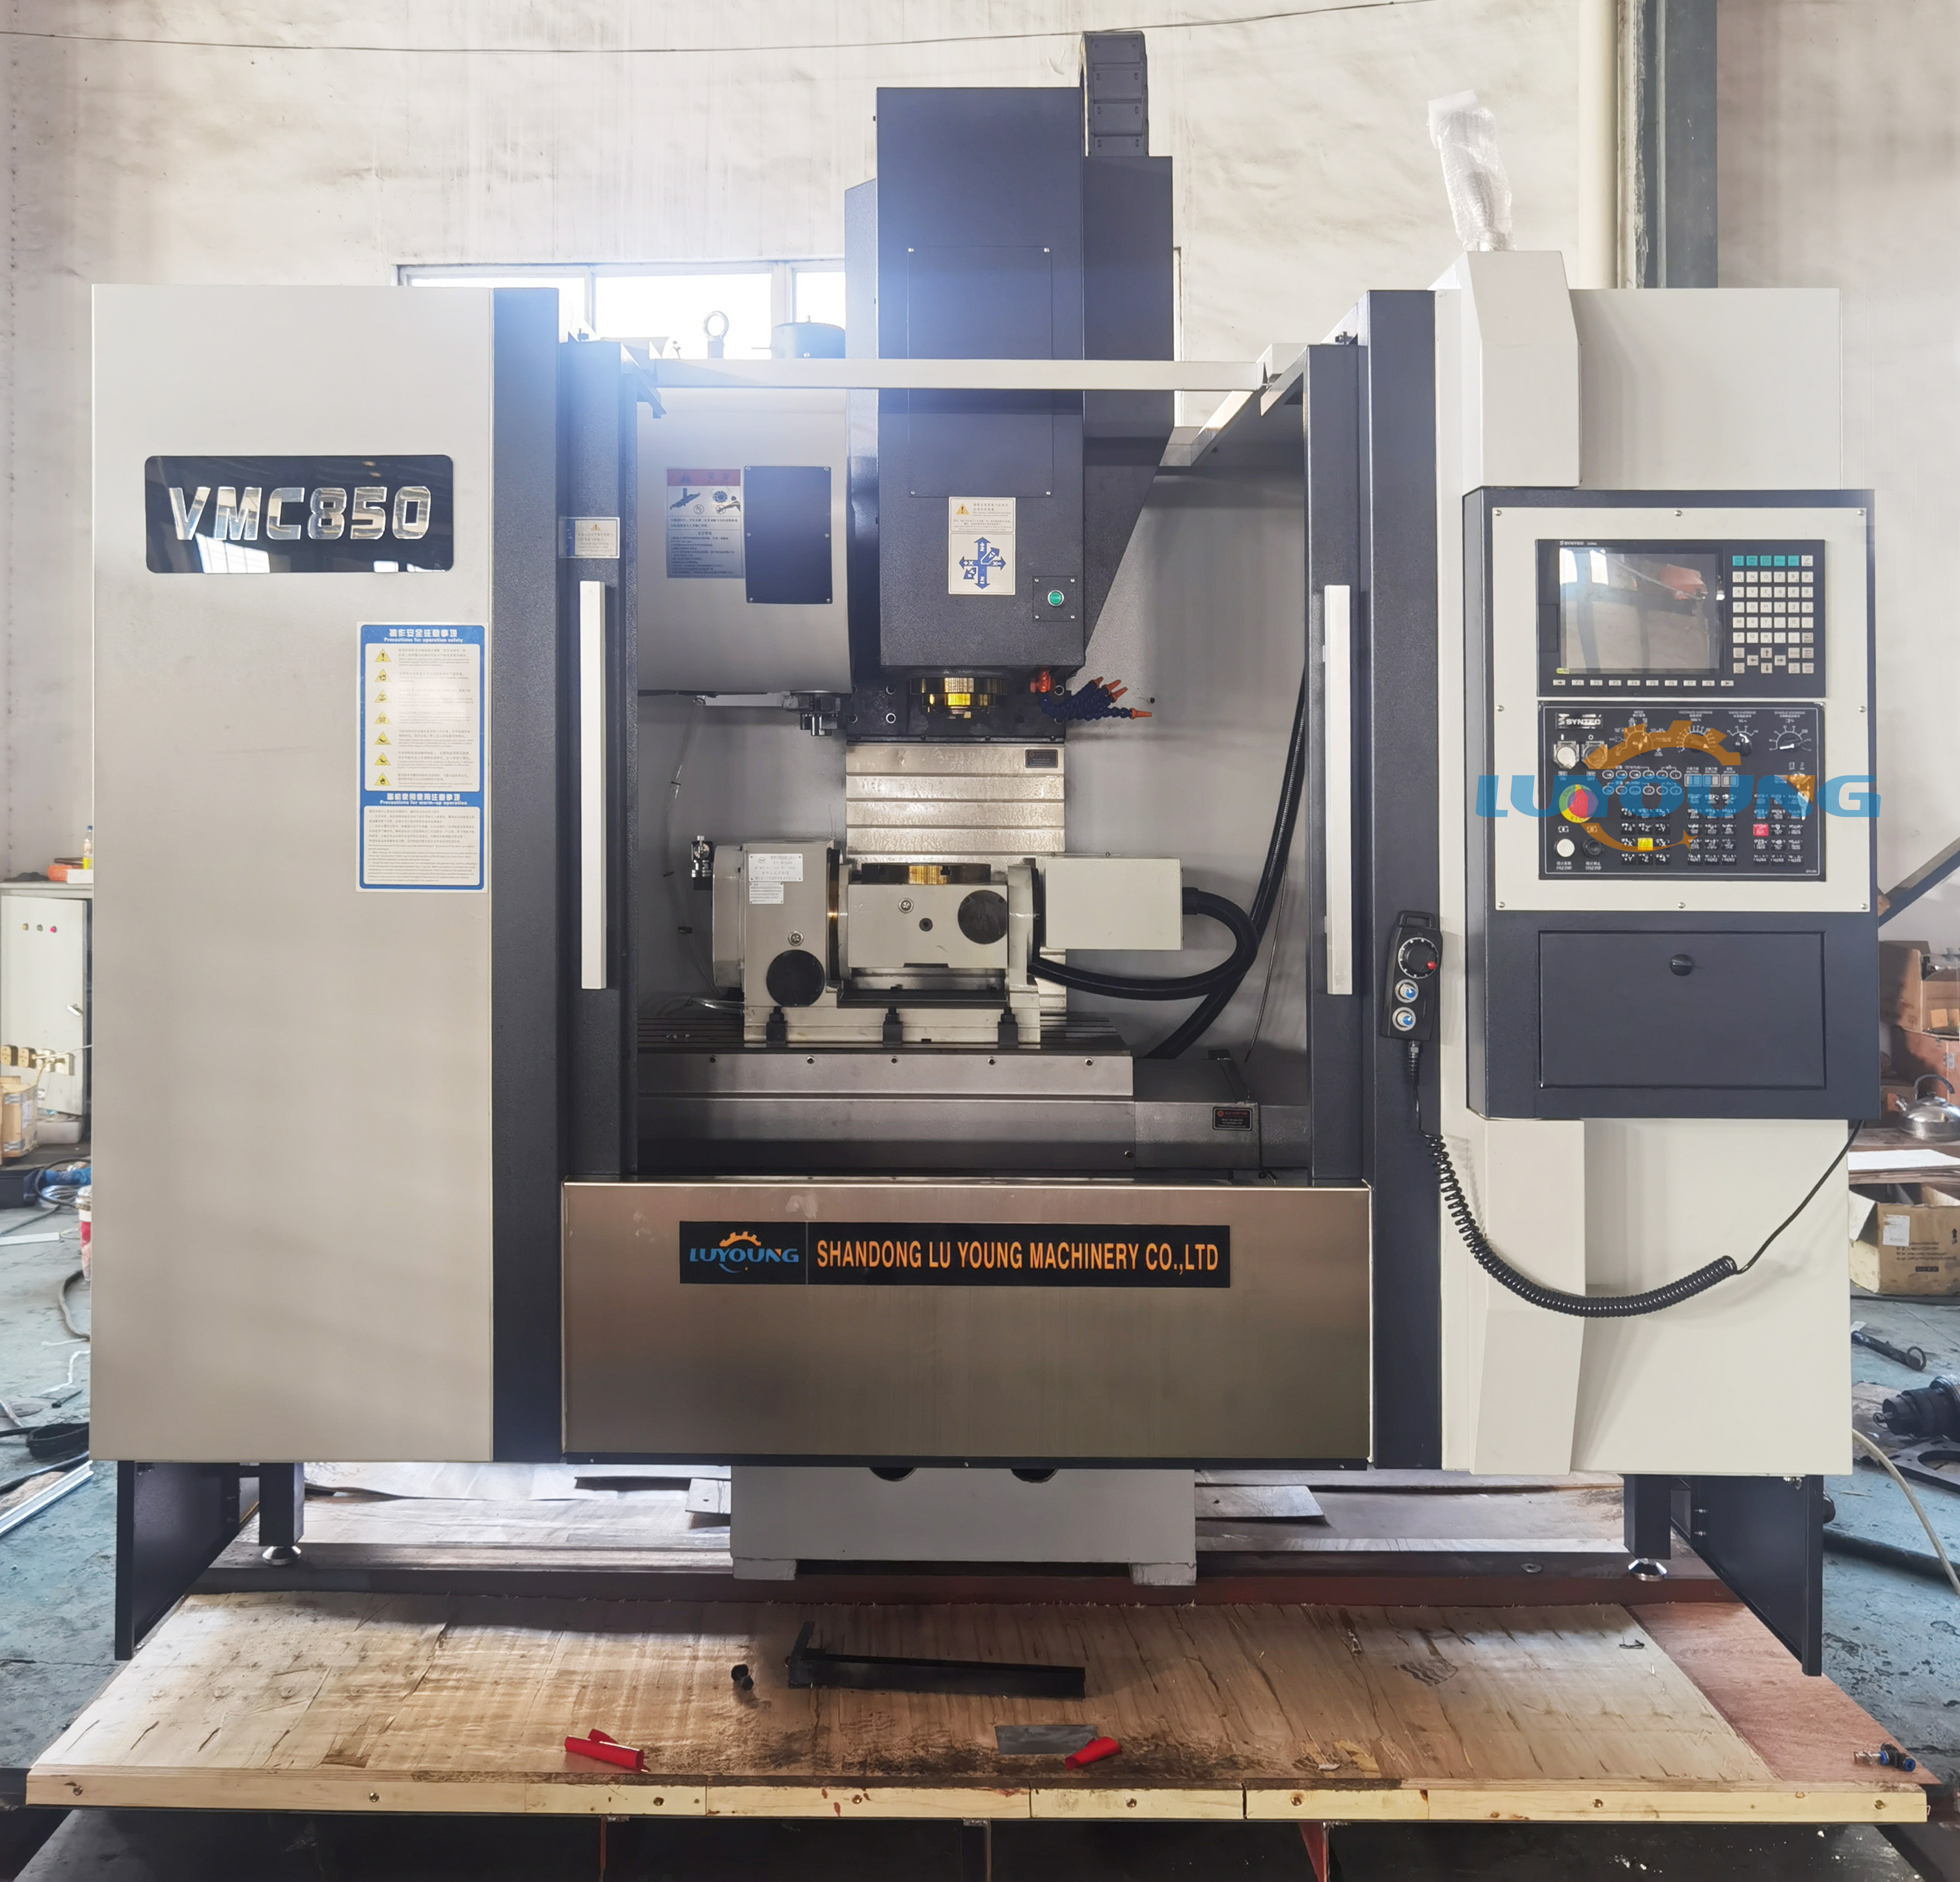 Export Vmc850 cnc milling mahcine with 5th axis to Thailand